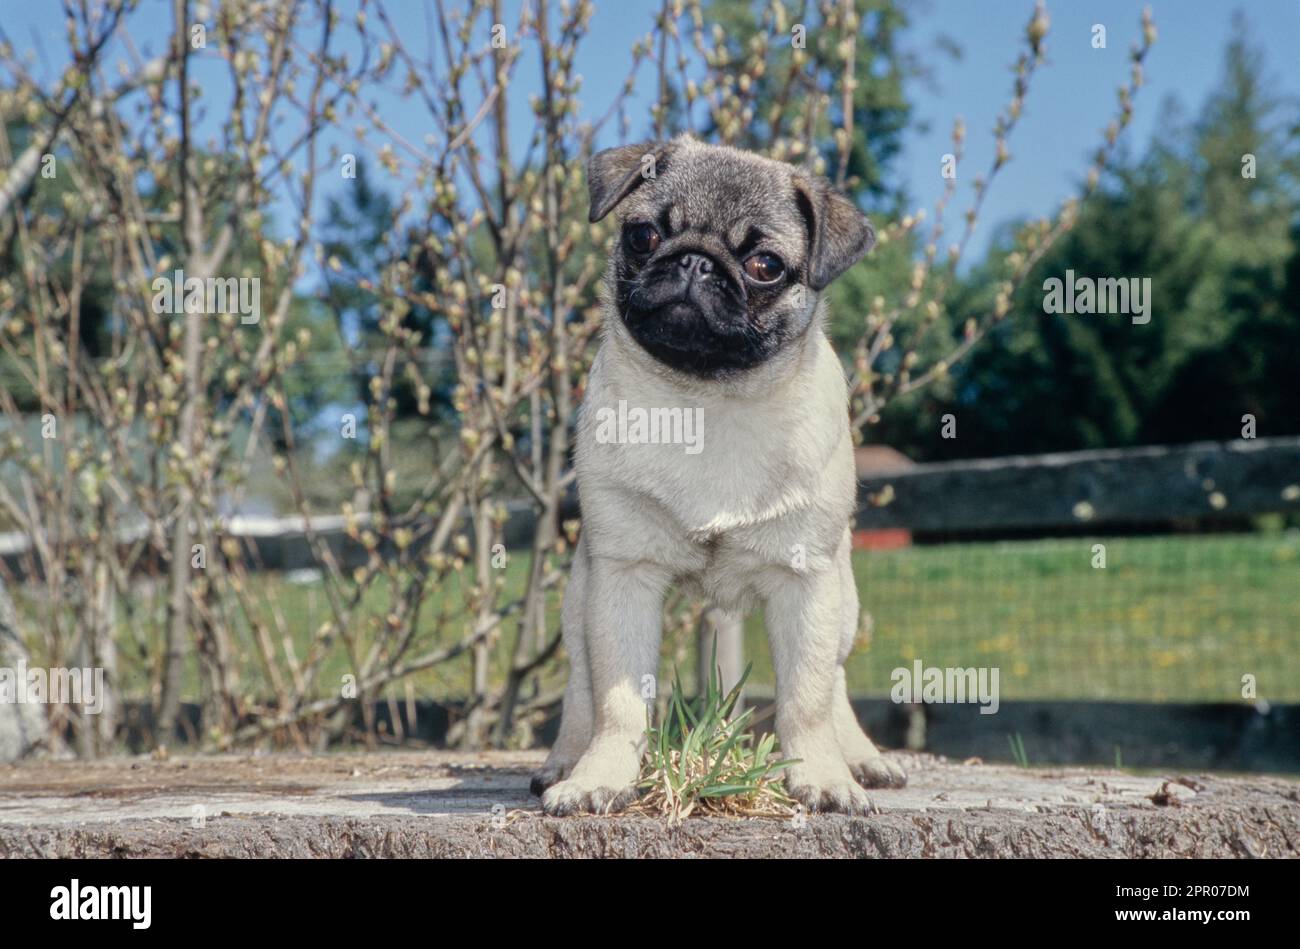 Pug puppy standing on tree stump outside near fence with head tilted Stock Photo